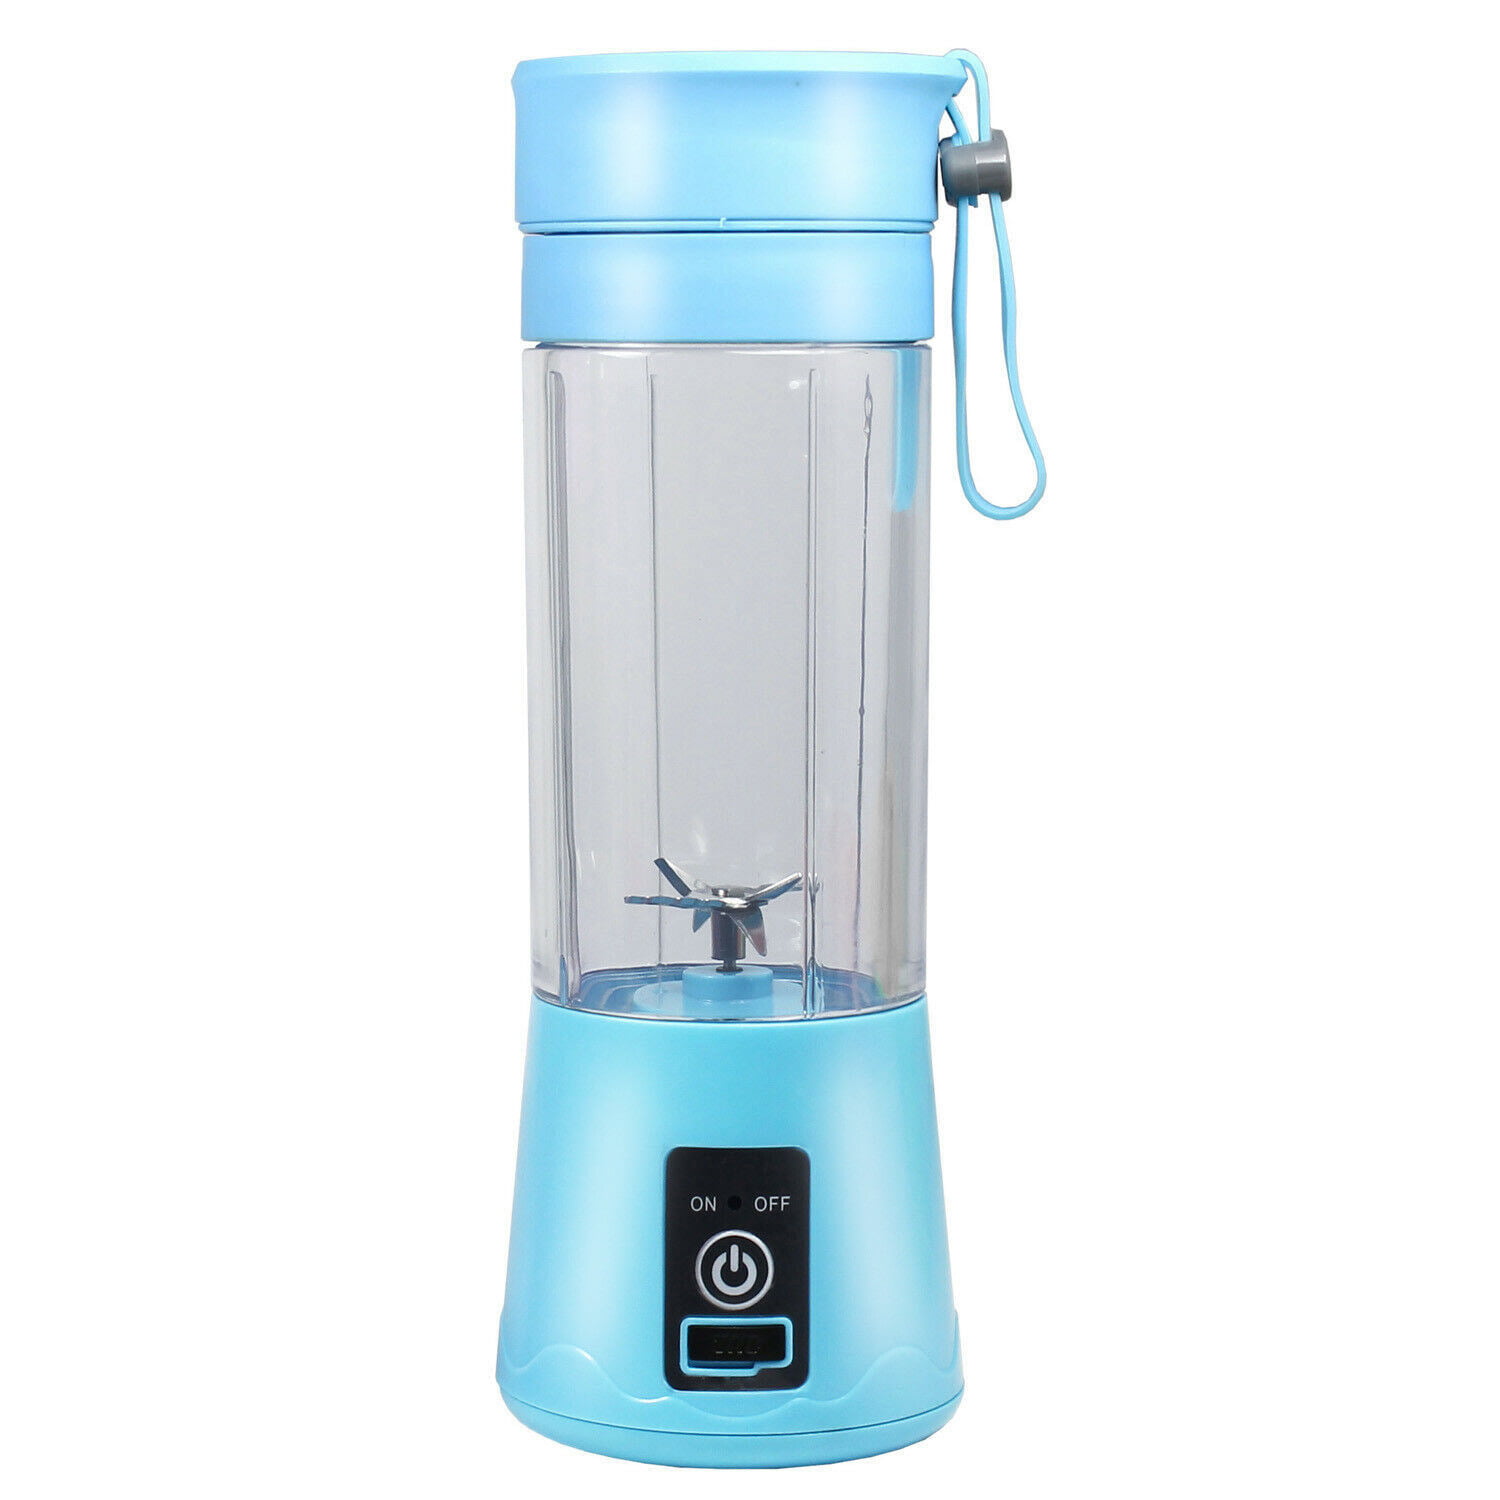 KAMARAMA Portable Blender for Shakes and Smoothies - Rechargeable 155-Oz Fusion Blender & Portable Juicer Comes with Carry Strap, USB Cab